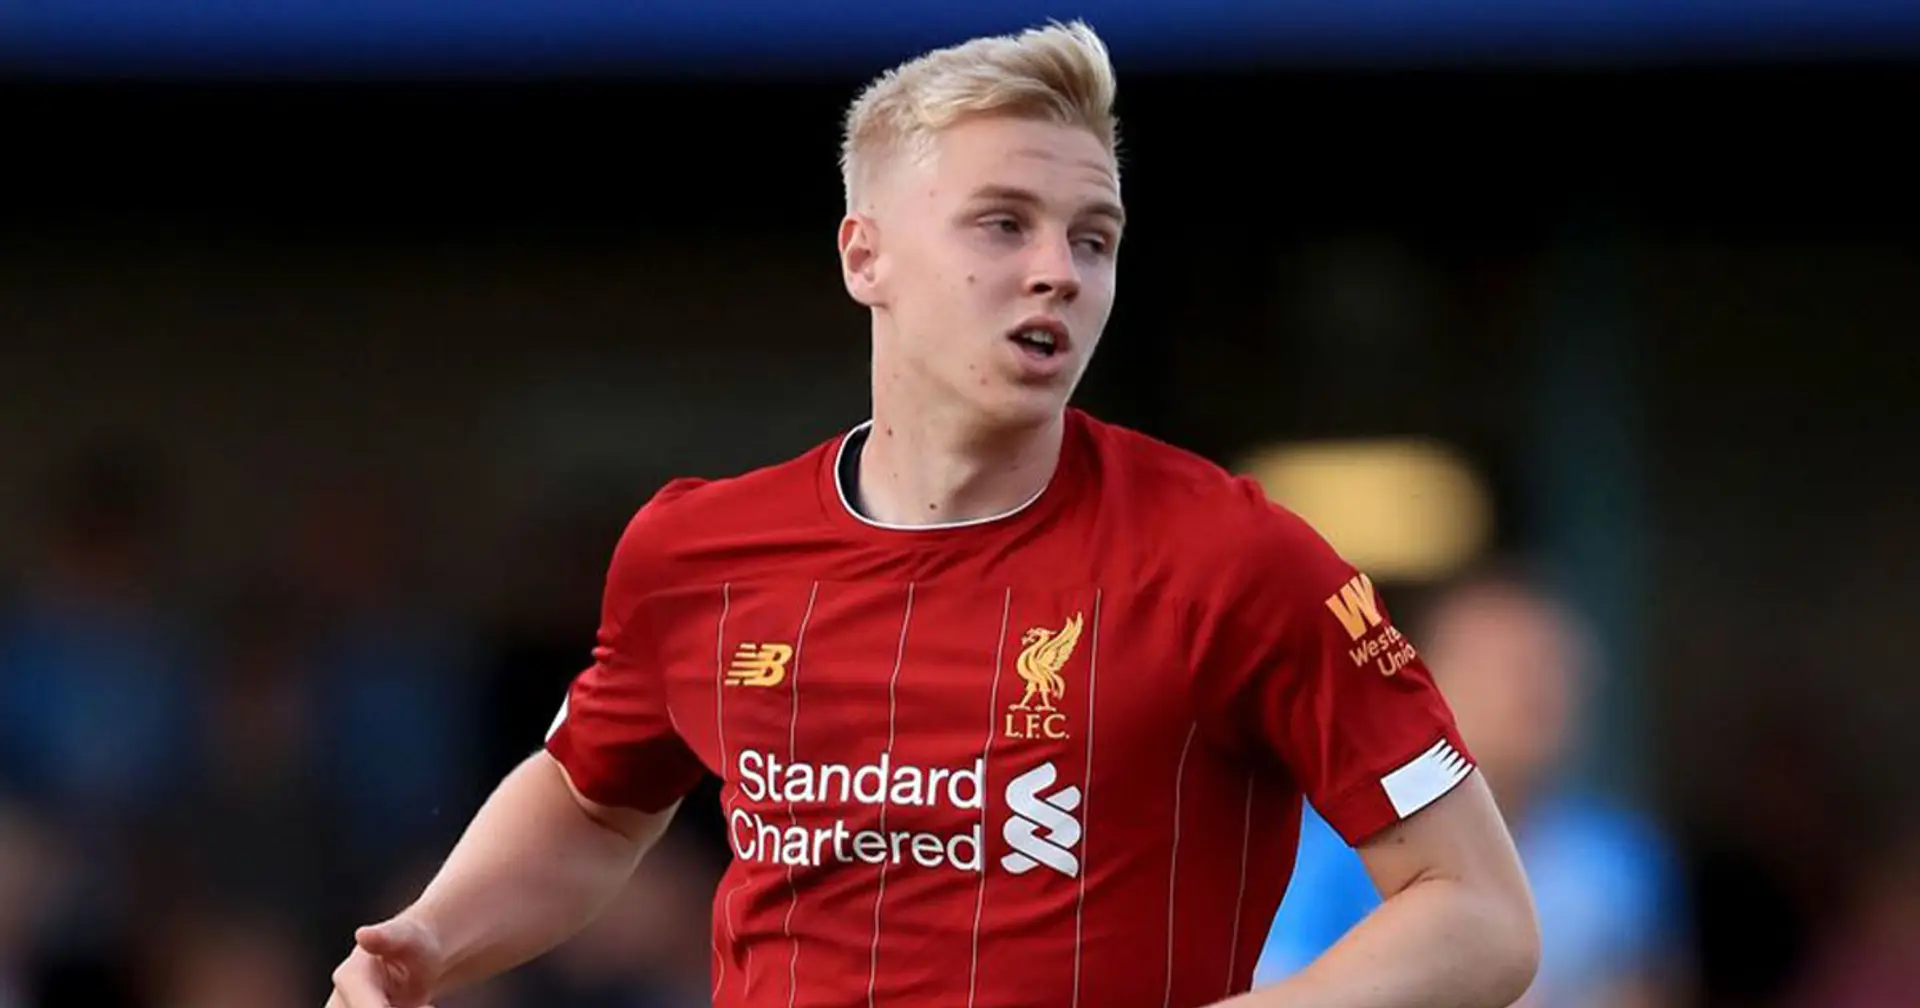 FA Youth Cup winner Luis Longstaff signs new deal with the Reds